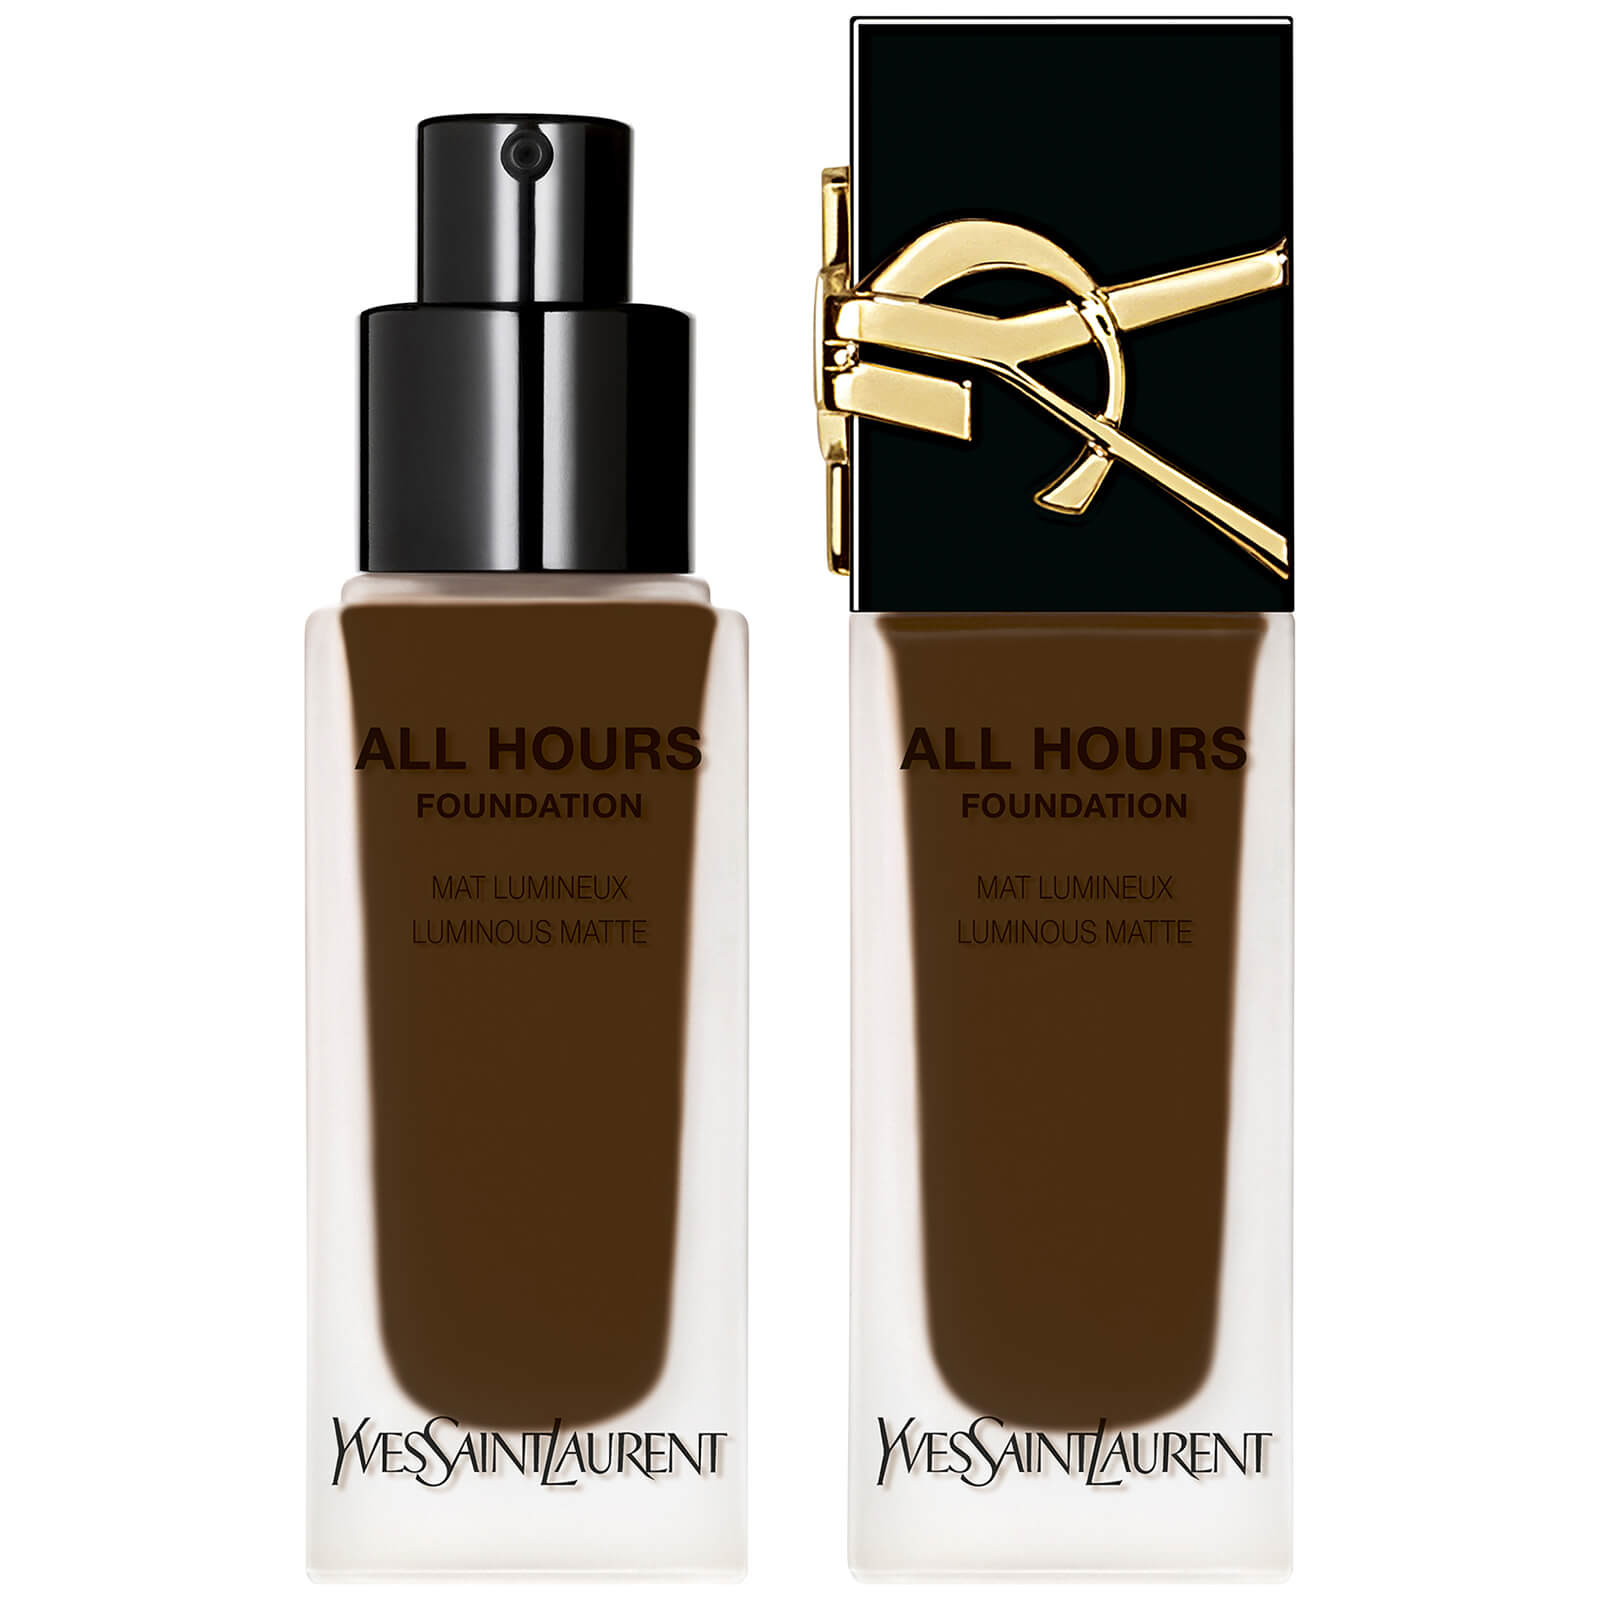 Yves Saint Laurent All Hours Luminous Matte Foundation with SPF 39 25ml (Various Shades) - DC9